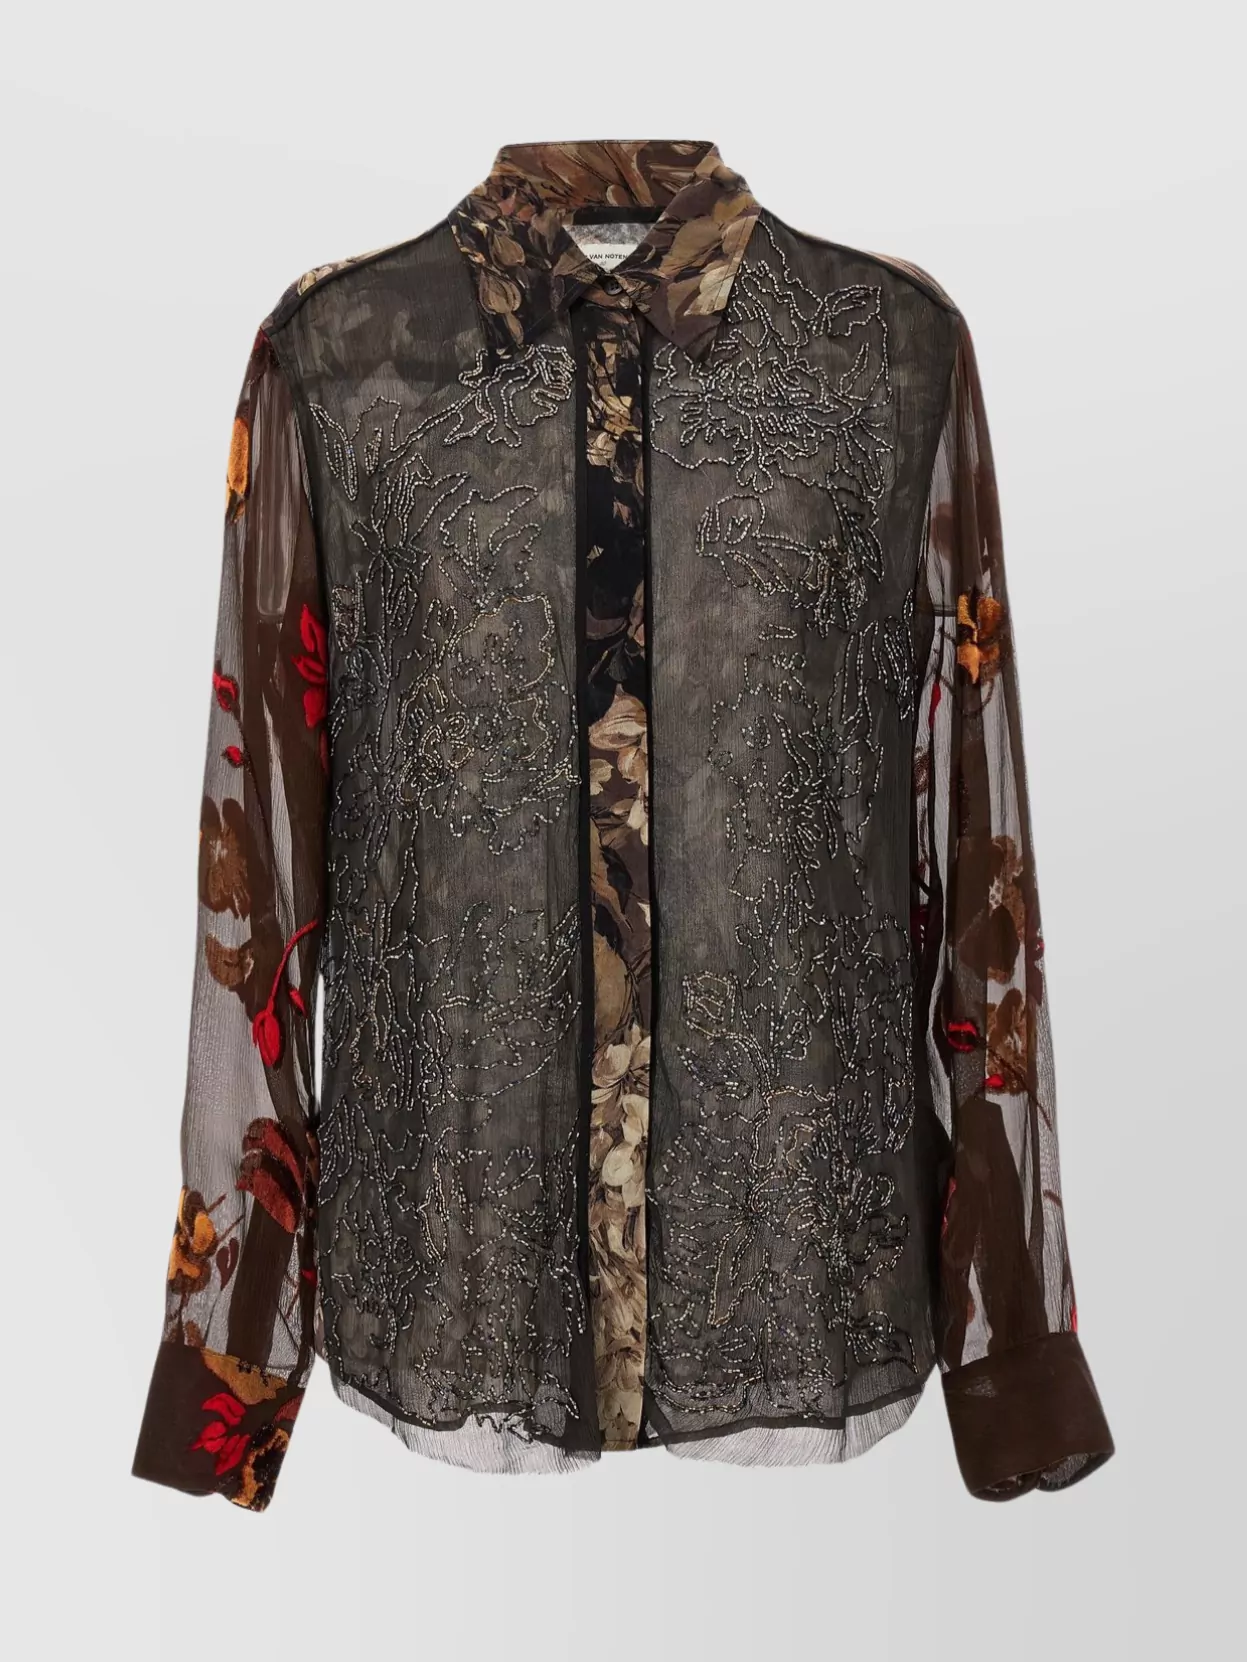 Shop Dries Van Noten "chowis" Embroidered Floral Shirt